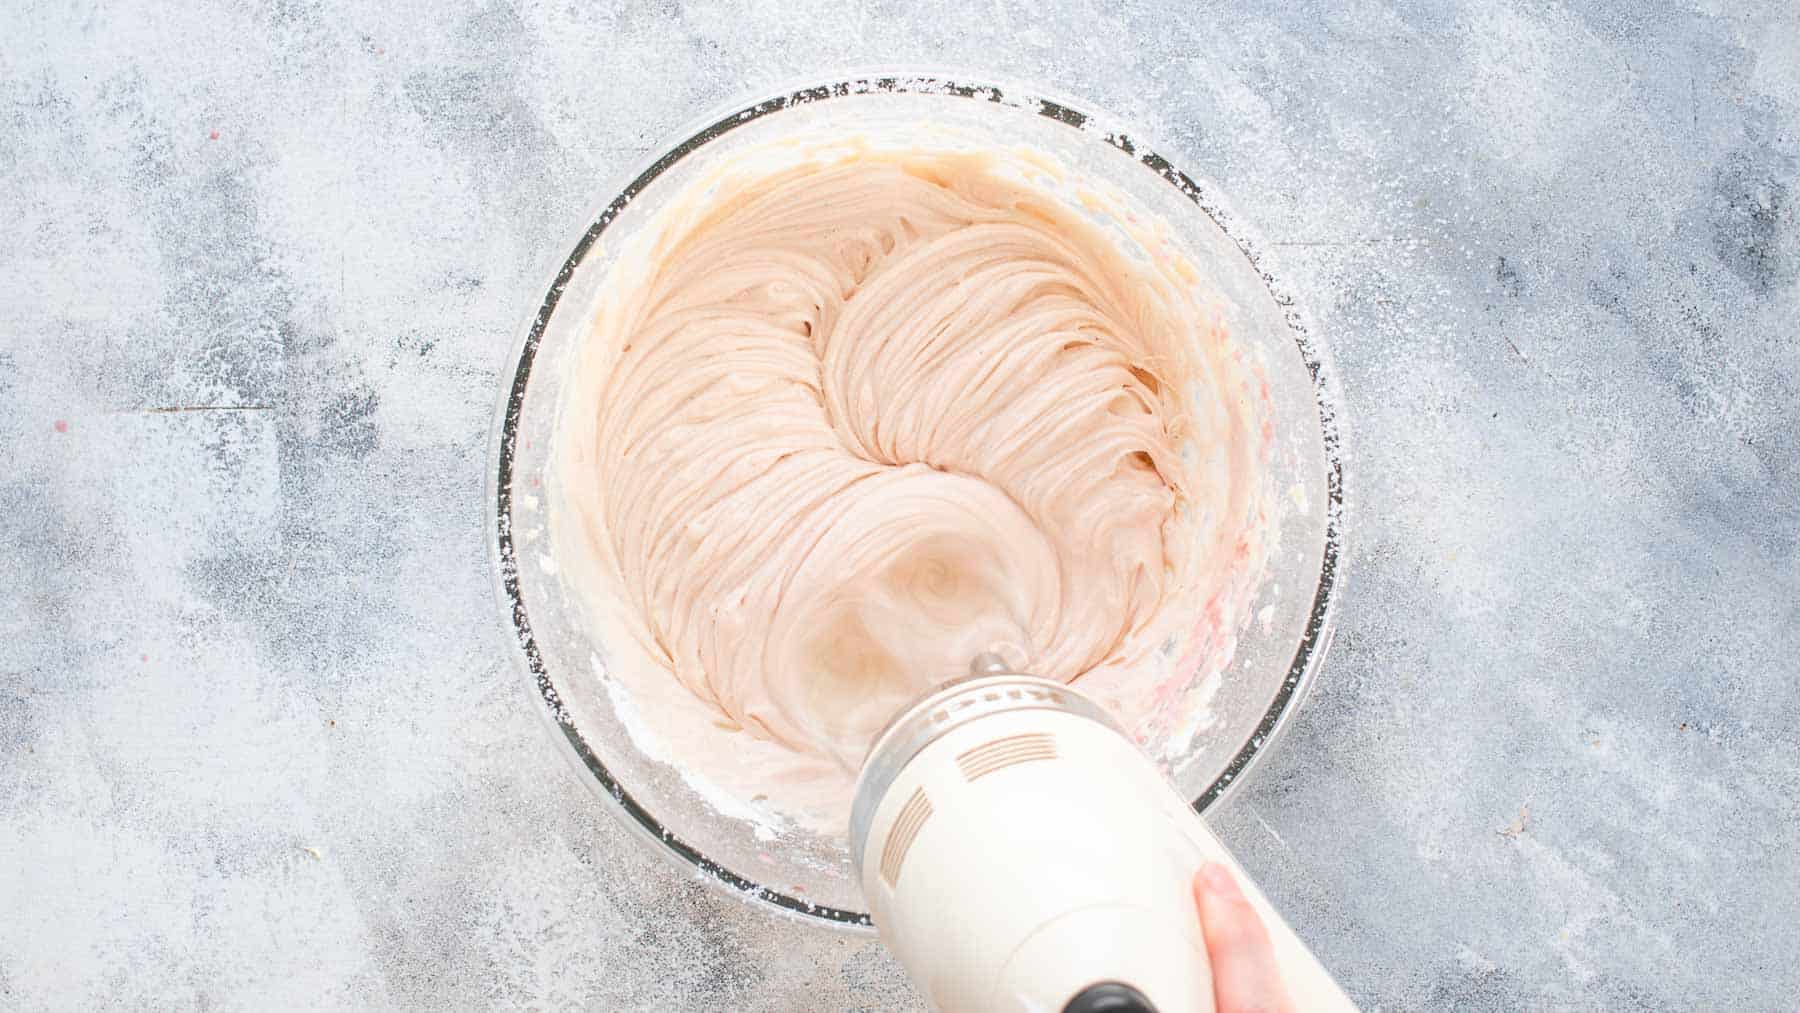 mixing cream cheese frosting in a glass bowl